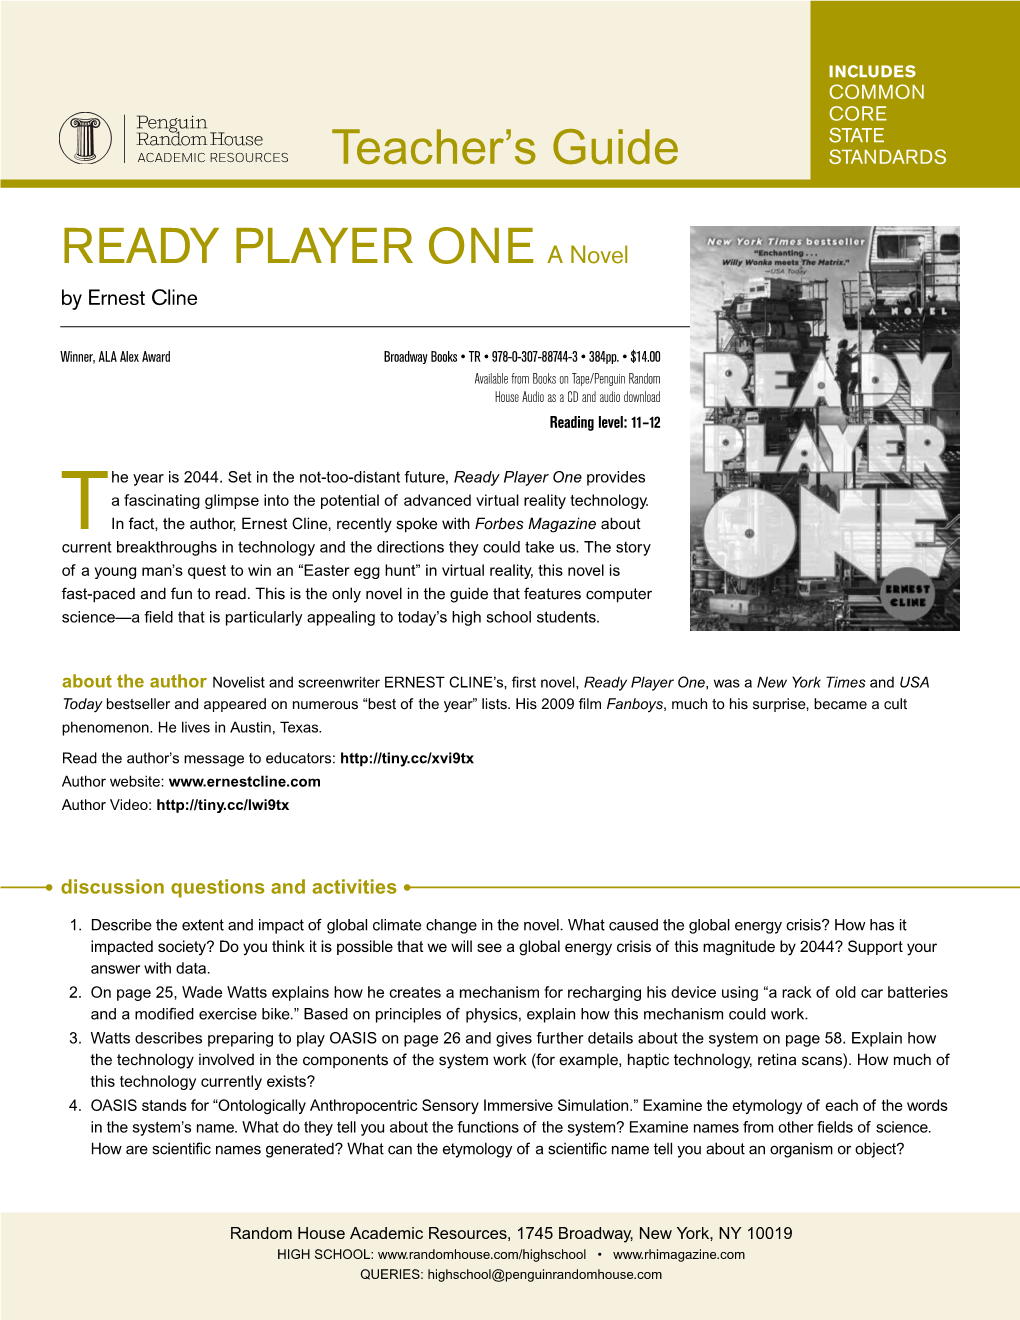 READY PLAYER ONE a Novel by Ernest Cline